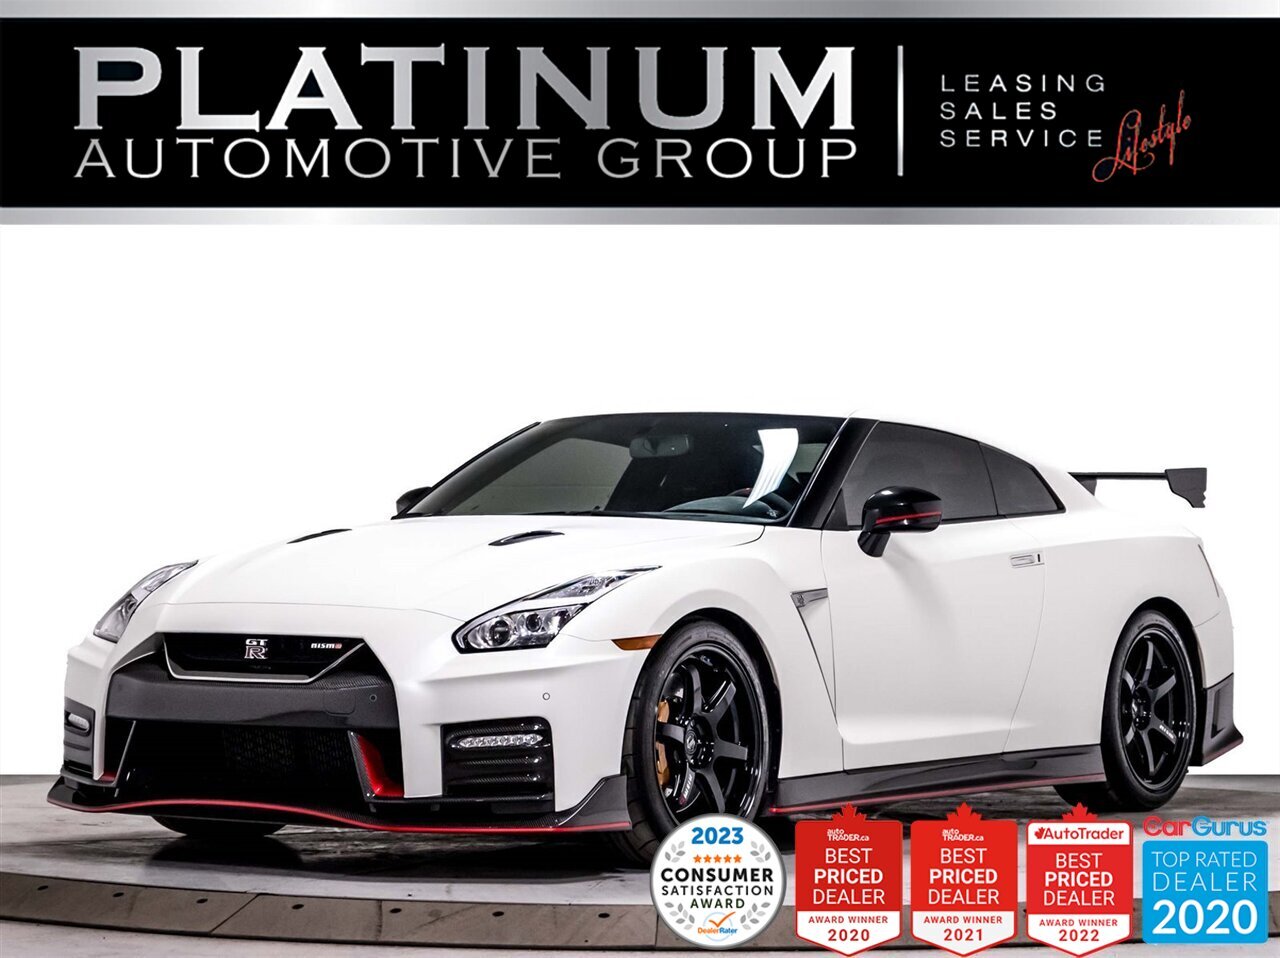 2017 Nissan GT-R NISMO, AWD, 600+HP, AMS UPGRADE, BREMBO, MATTE PPF